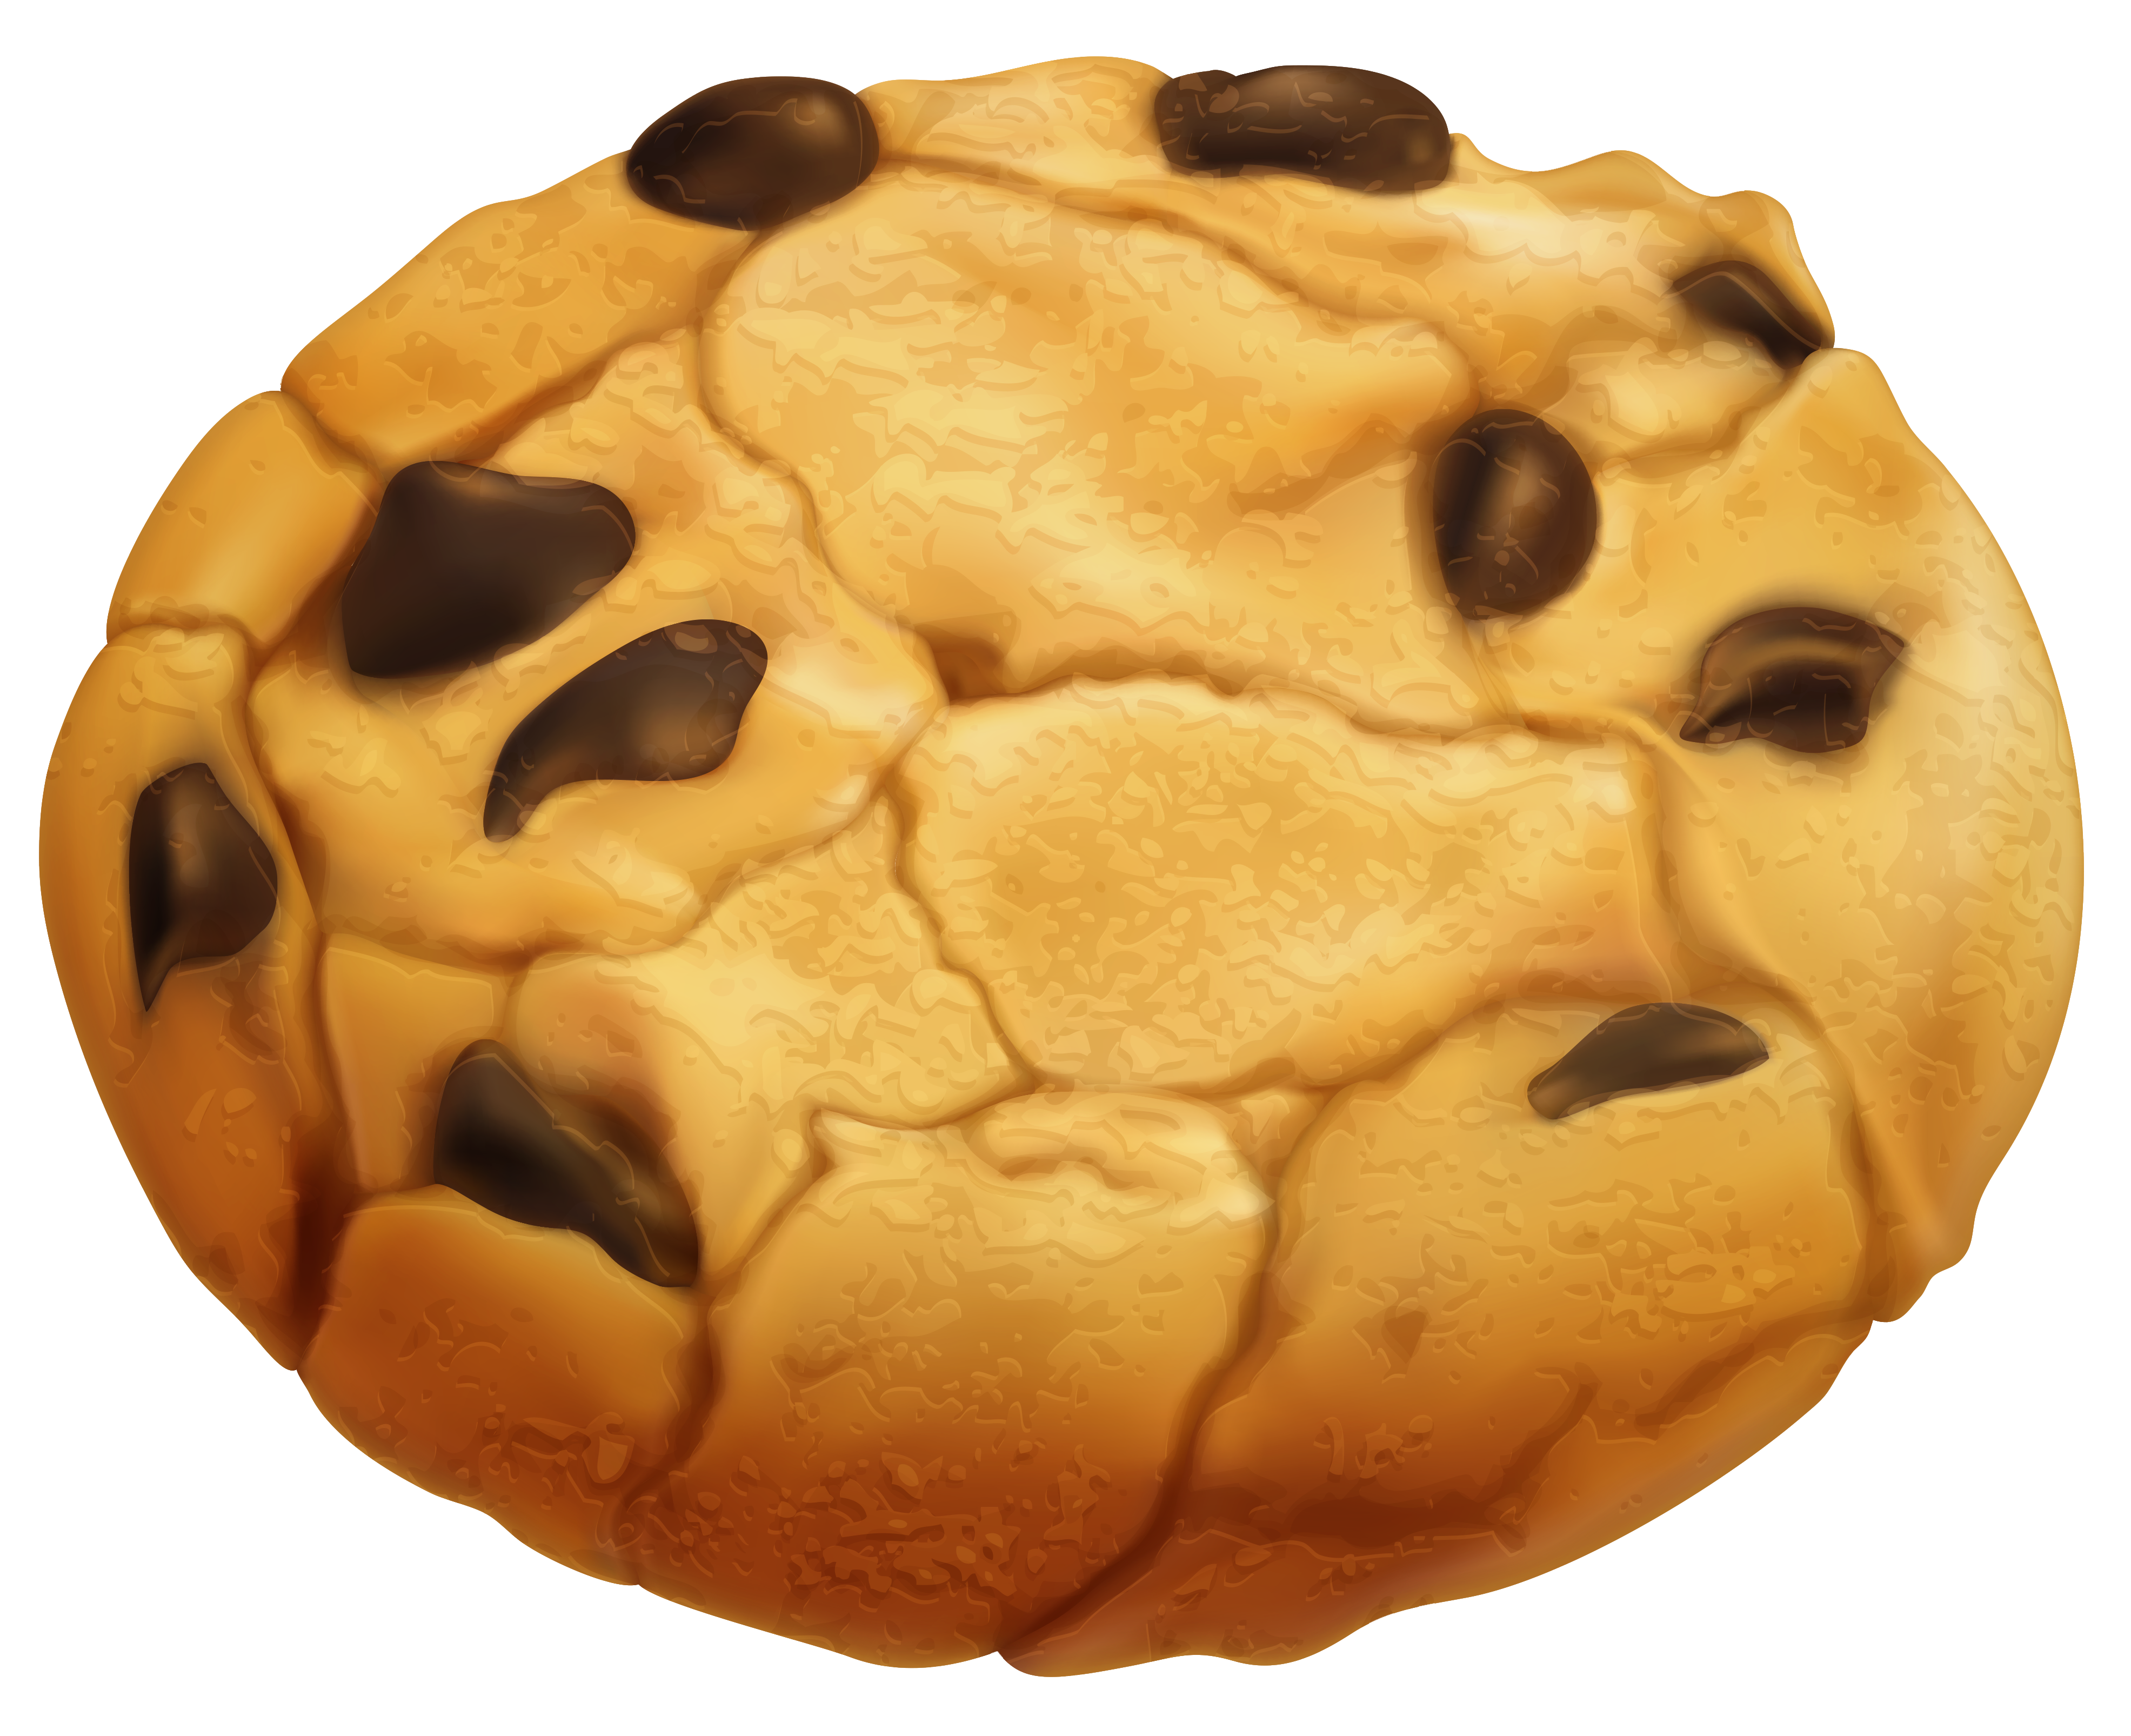 Are you looking for a cookie 